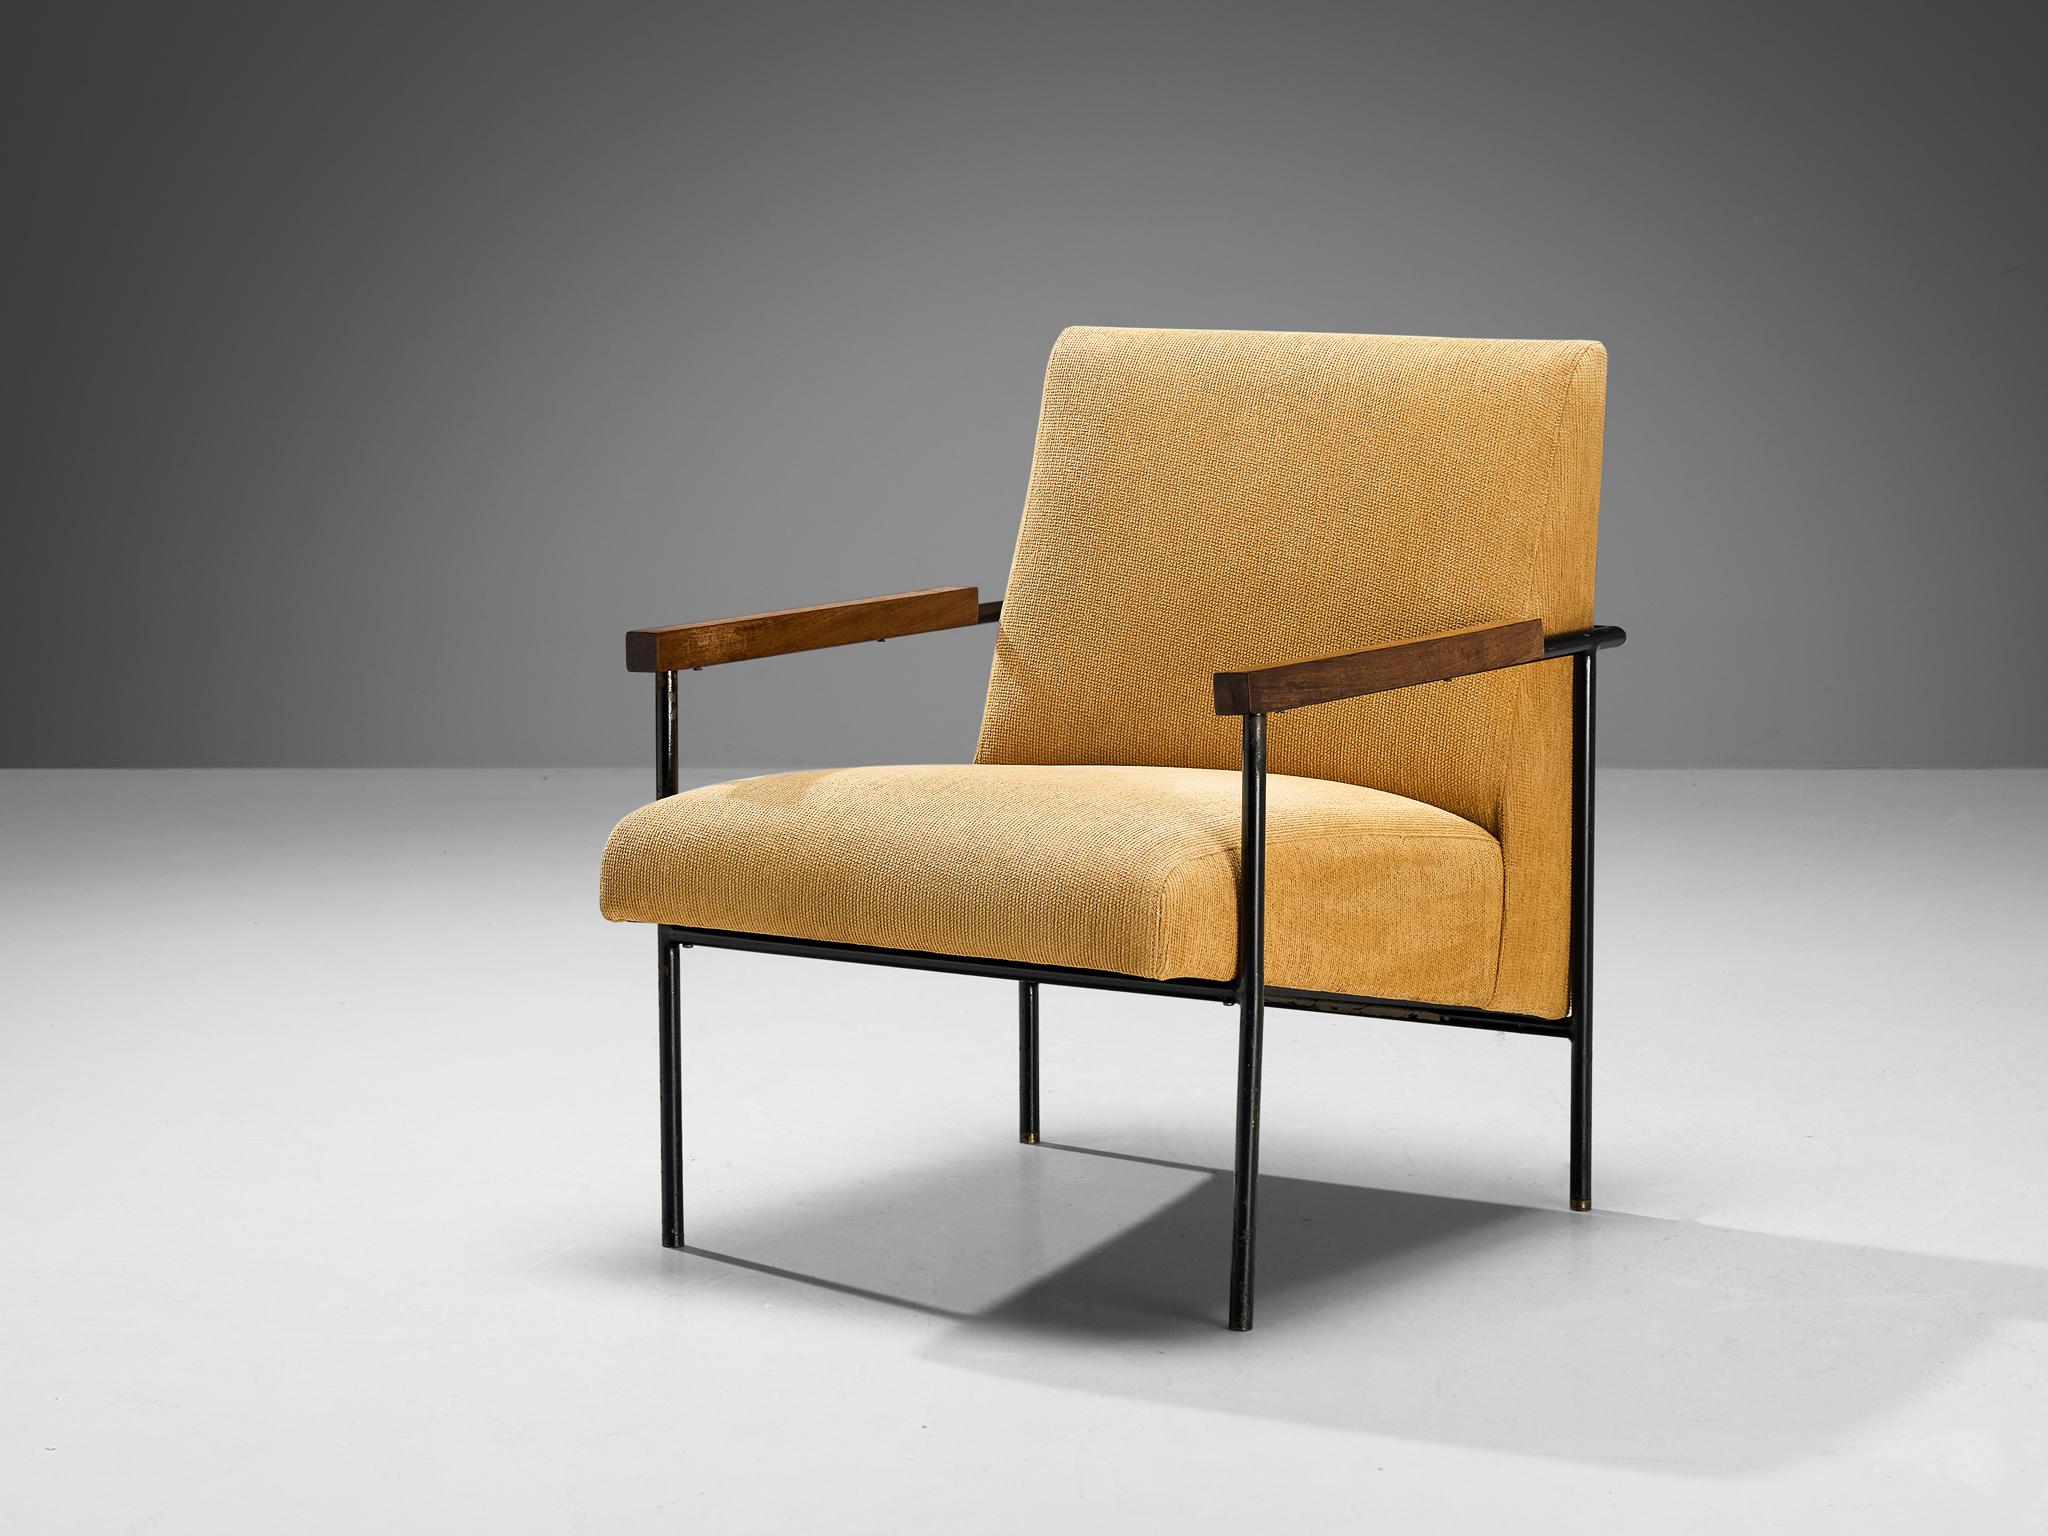 Geraldo de Barros for Unilabor, armchair, fabric, iron, wood, Brazil, 1955

Crafted by the Brazilian modernist designer Geraldo de Barros, this lounge chair showcases the typical materials employed by the Unilabor workshop: an iron frame paired with